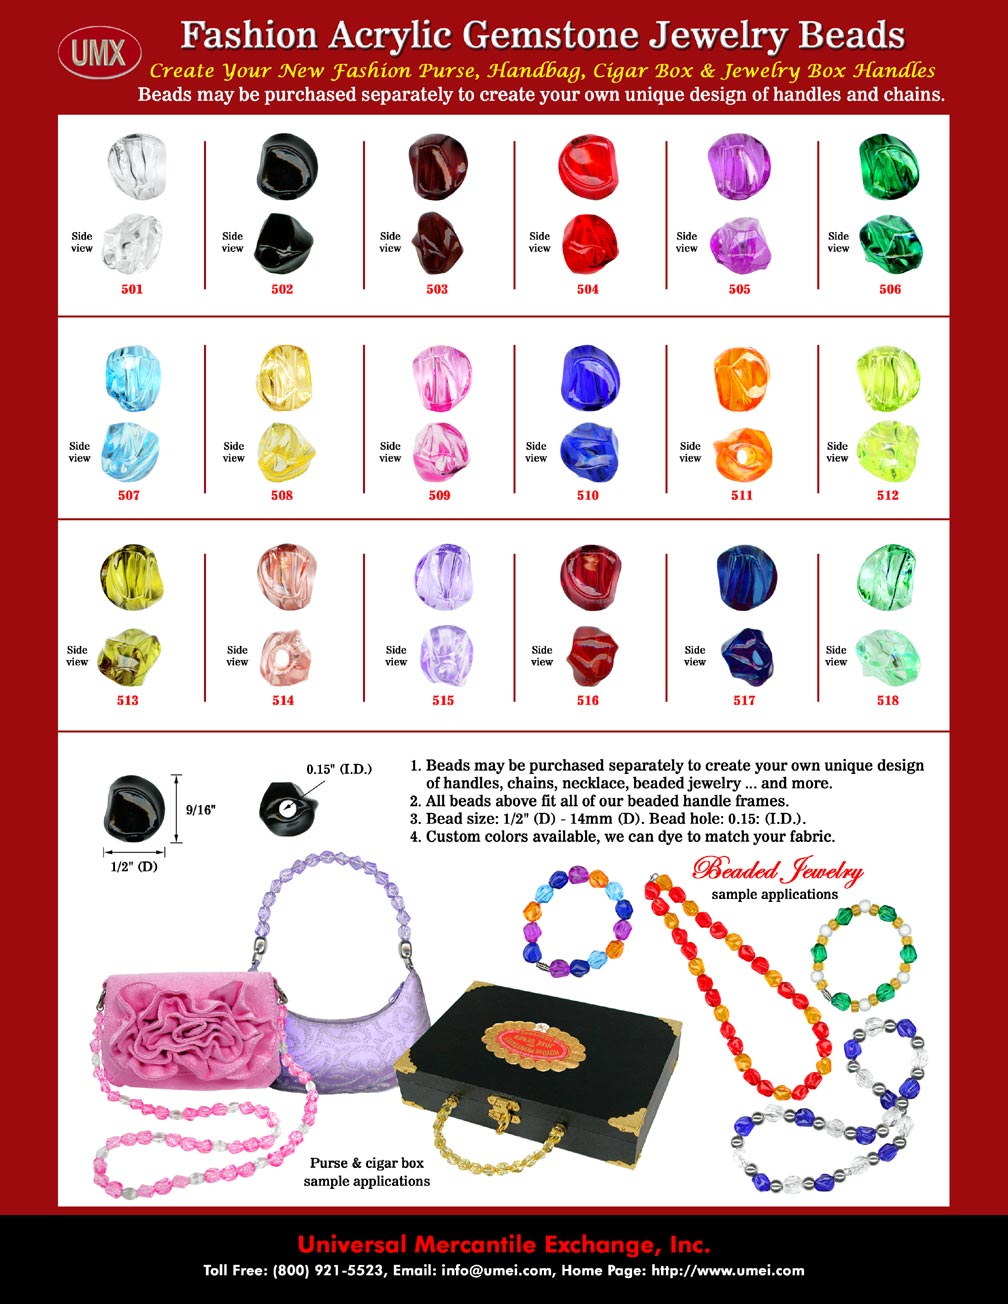 We supplies wholesale gemstone beads to wholesale gemstone beaded jewelry and gemstone necklace making suppliers.